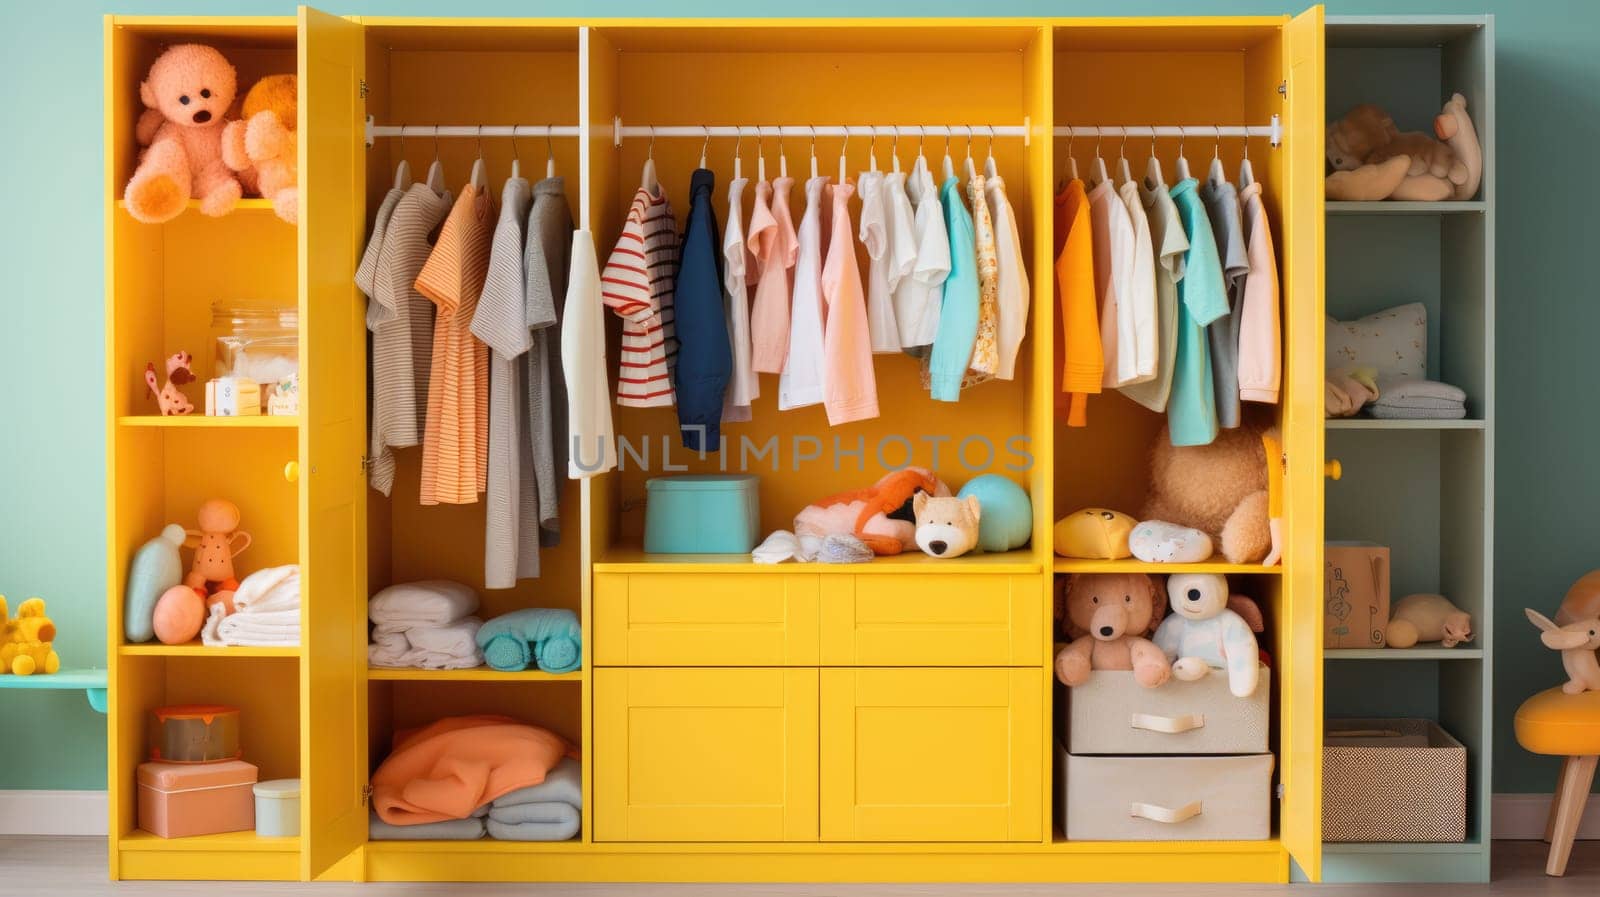 Children's wardrobe with various bright clothes for babies. Motherhood, cleaning home kids wardrobe. AI